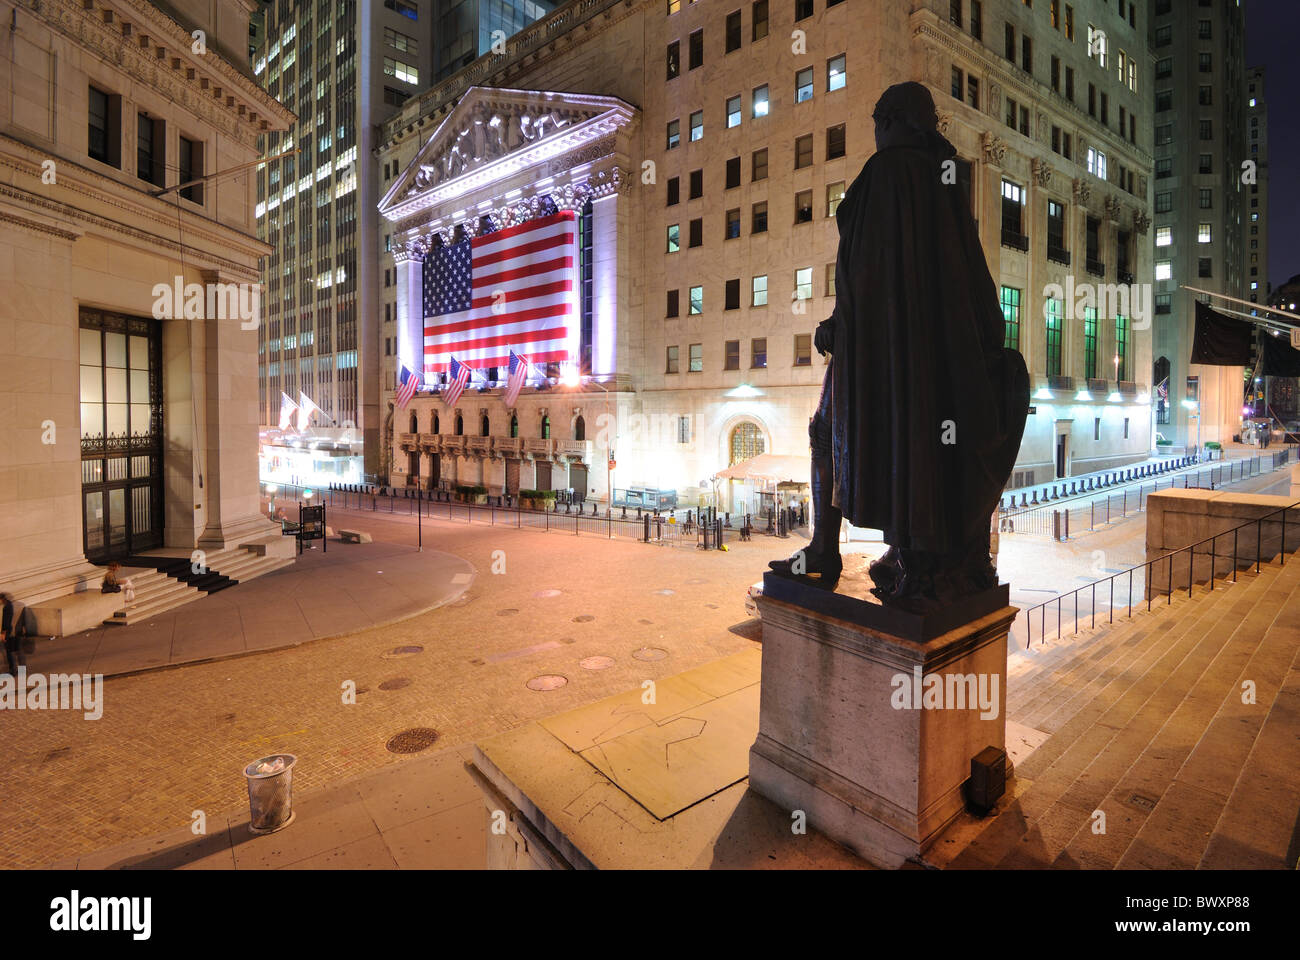 Wall Street in Lower Manhattan viewed from behind the George Washington statue at Federal Hall in New York, New York, USA. Stock Photo